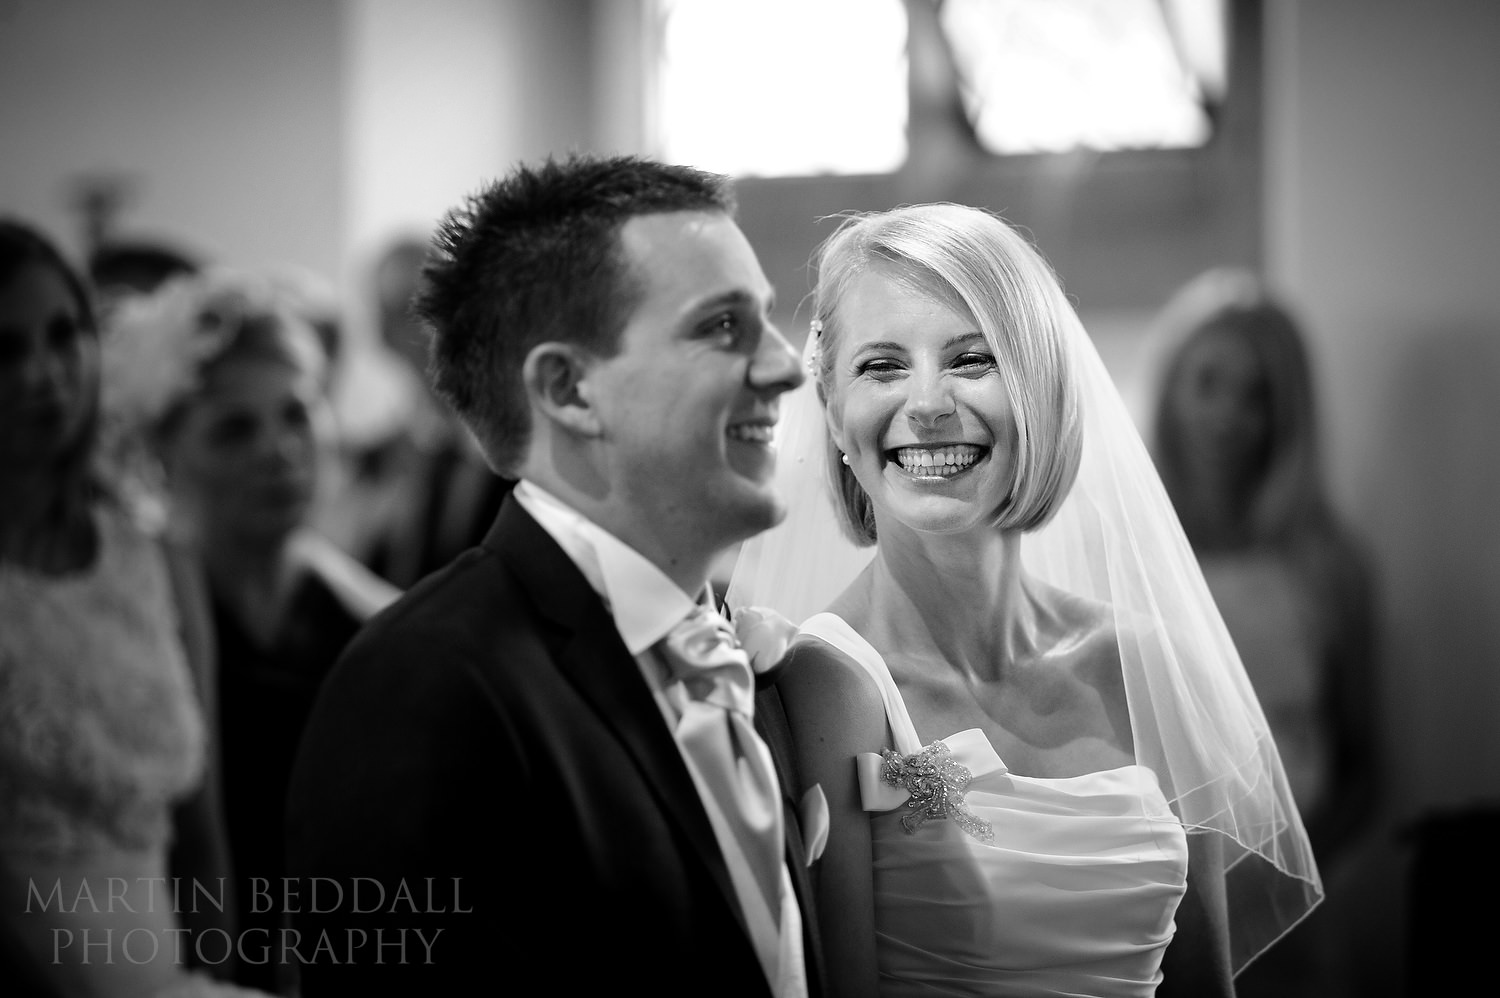 Smiling bride and groom